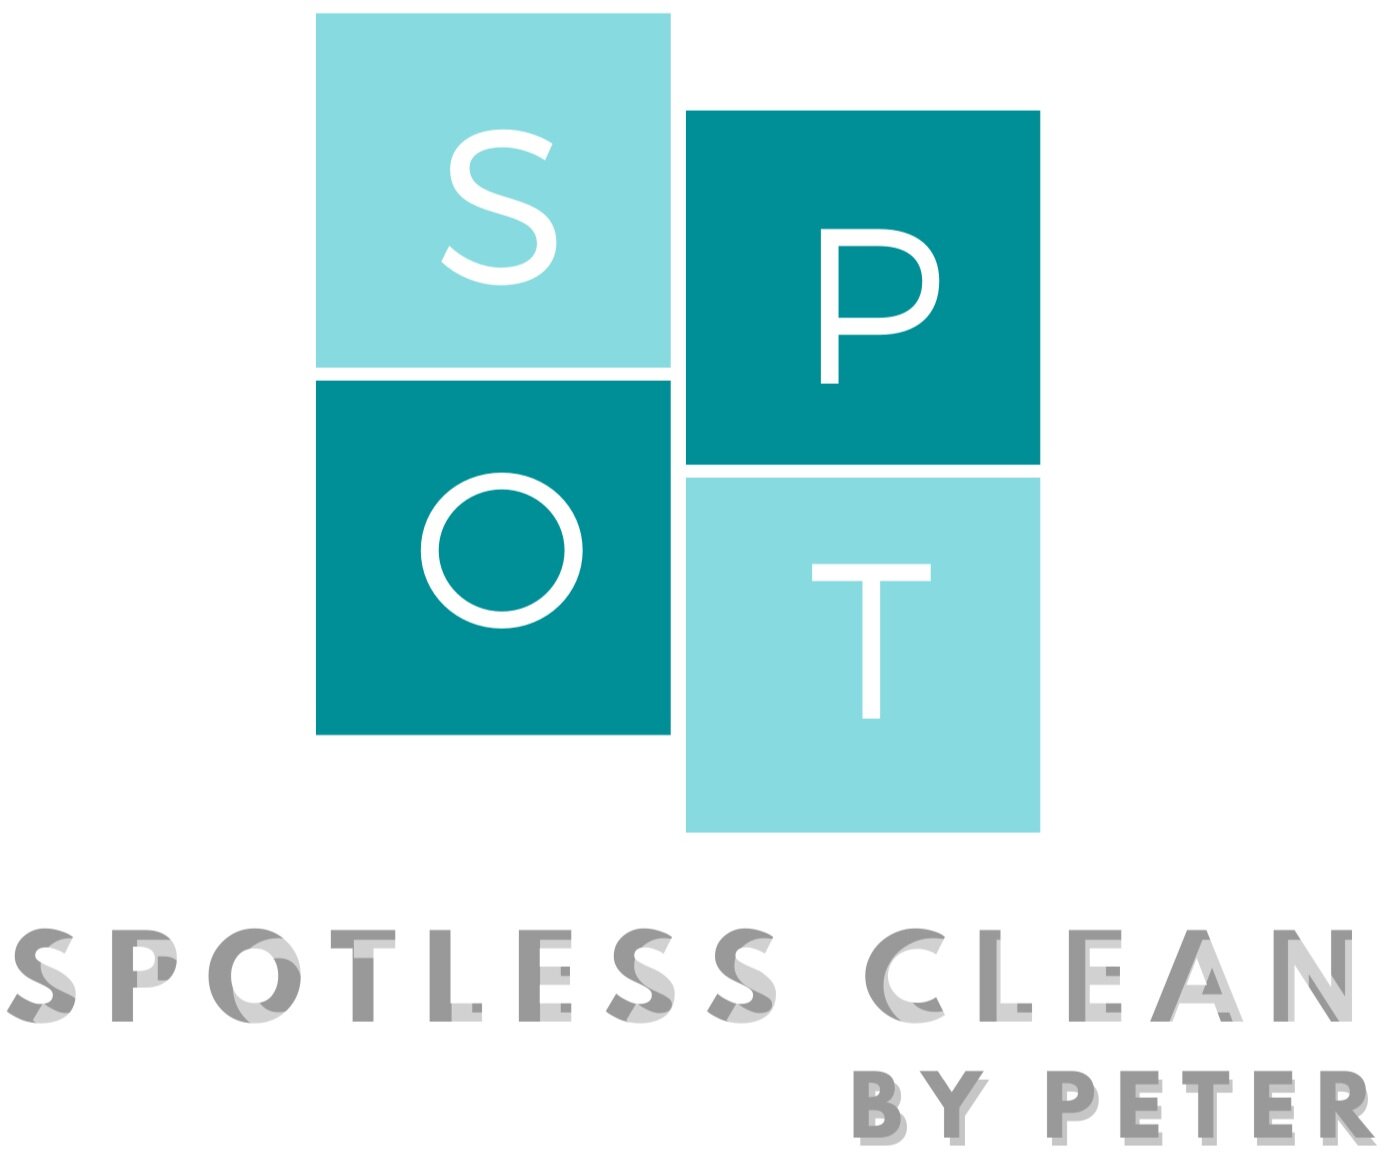 Spotless Clean by Peter